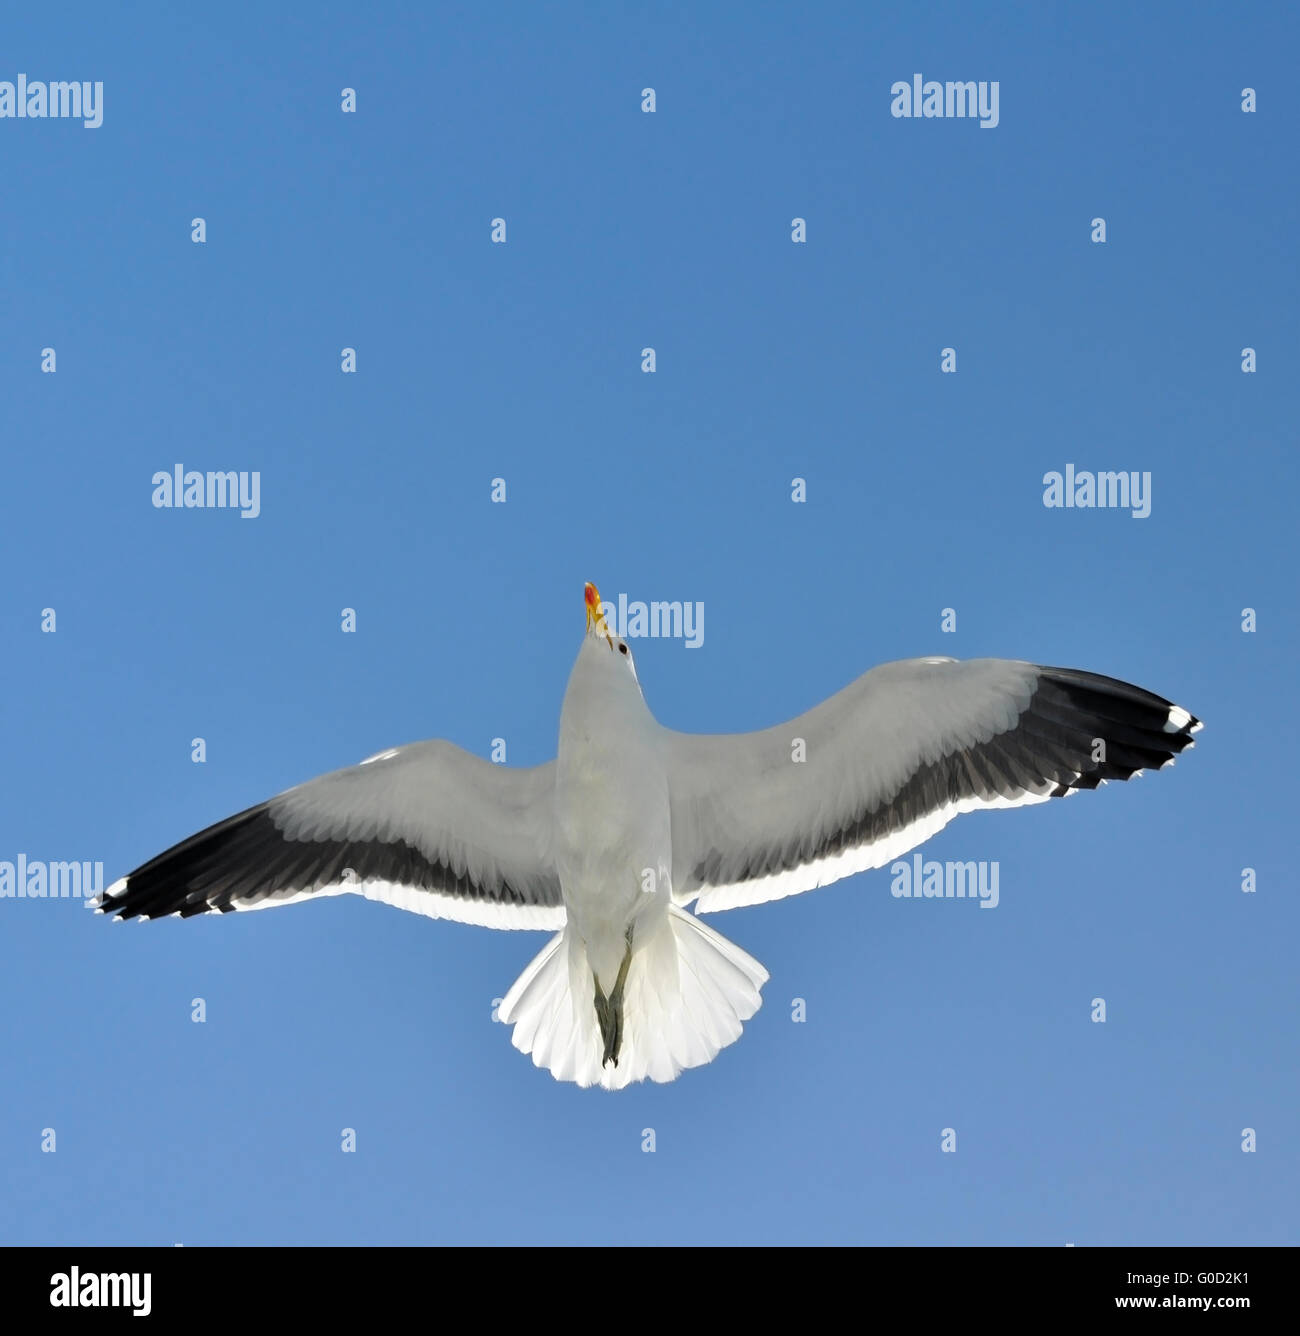 Flying Seagull Underneath Stock Photo